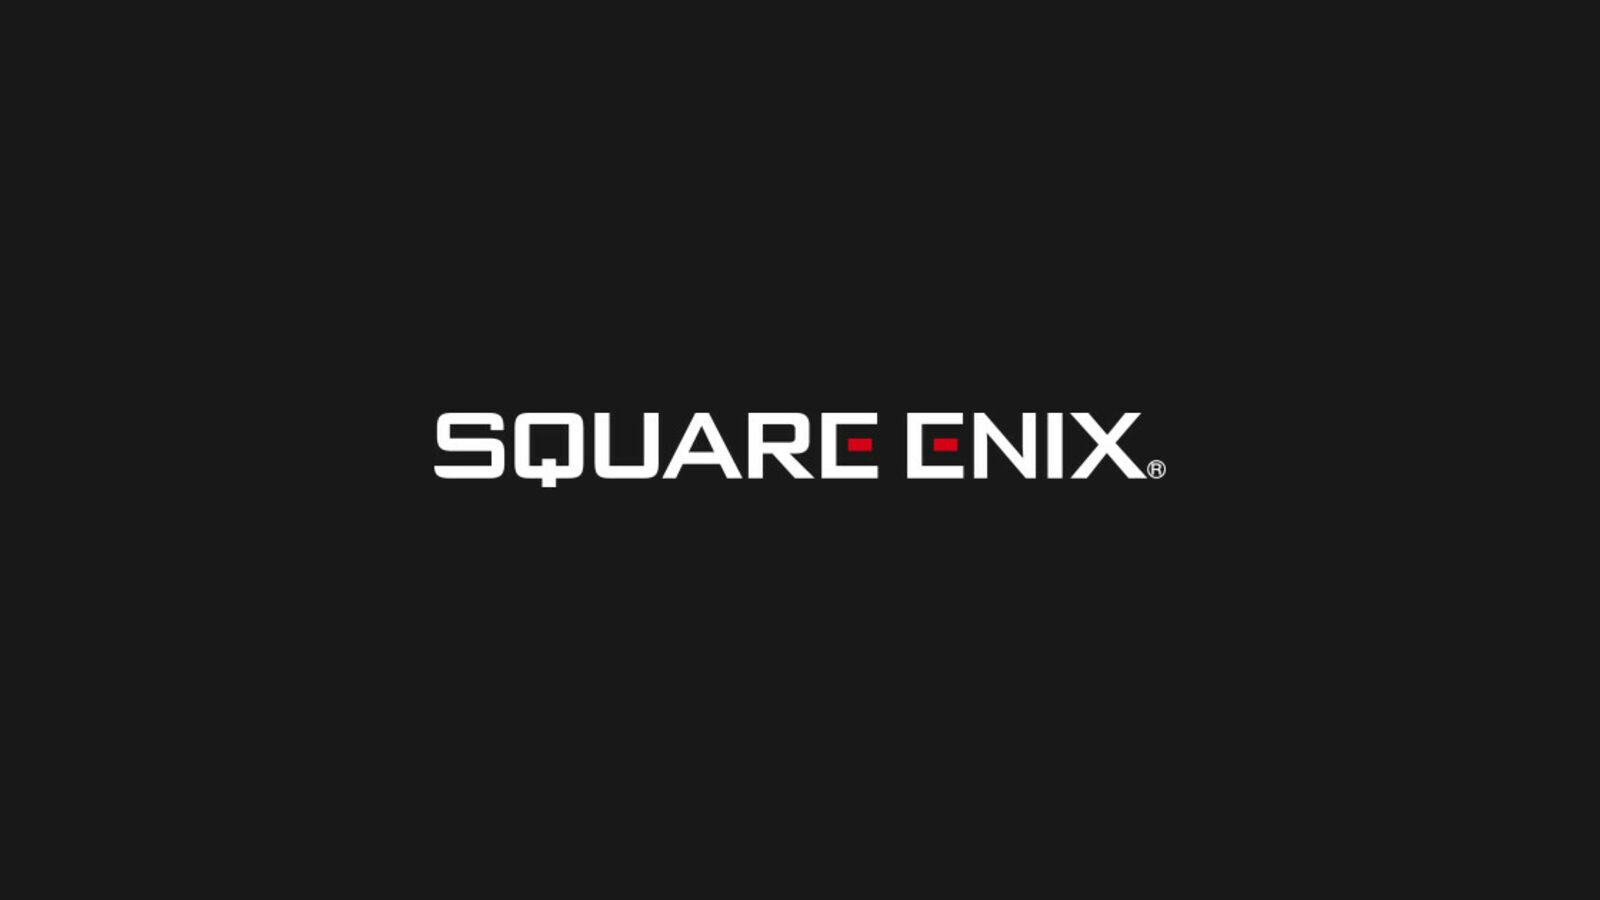 Square Enix reveals its plans to establish new studios and acquire others